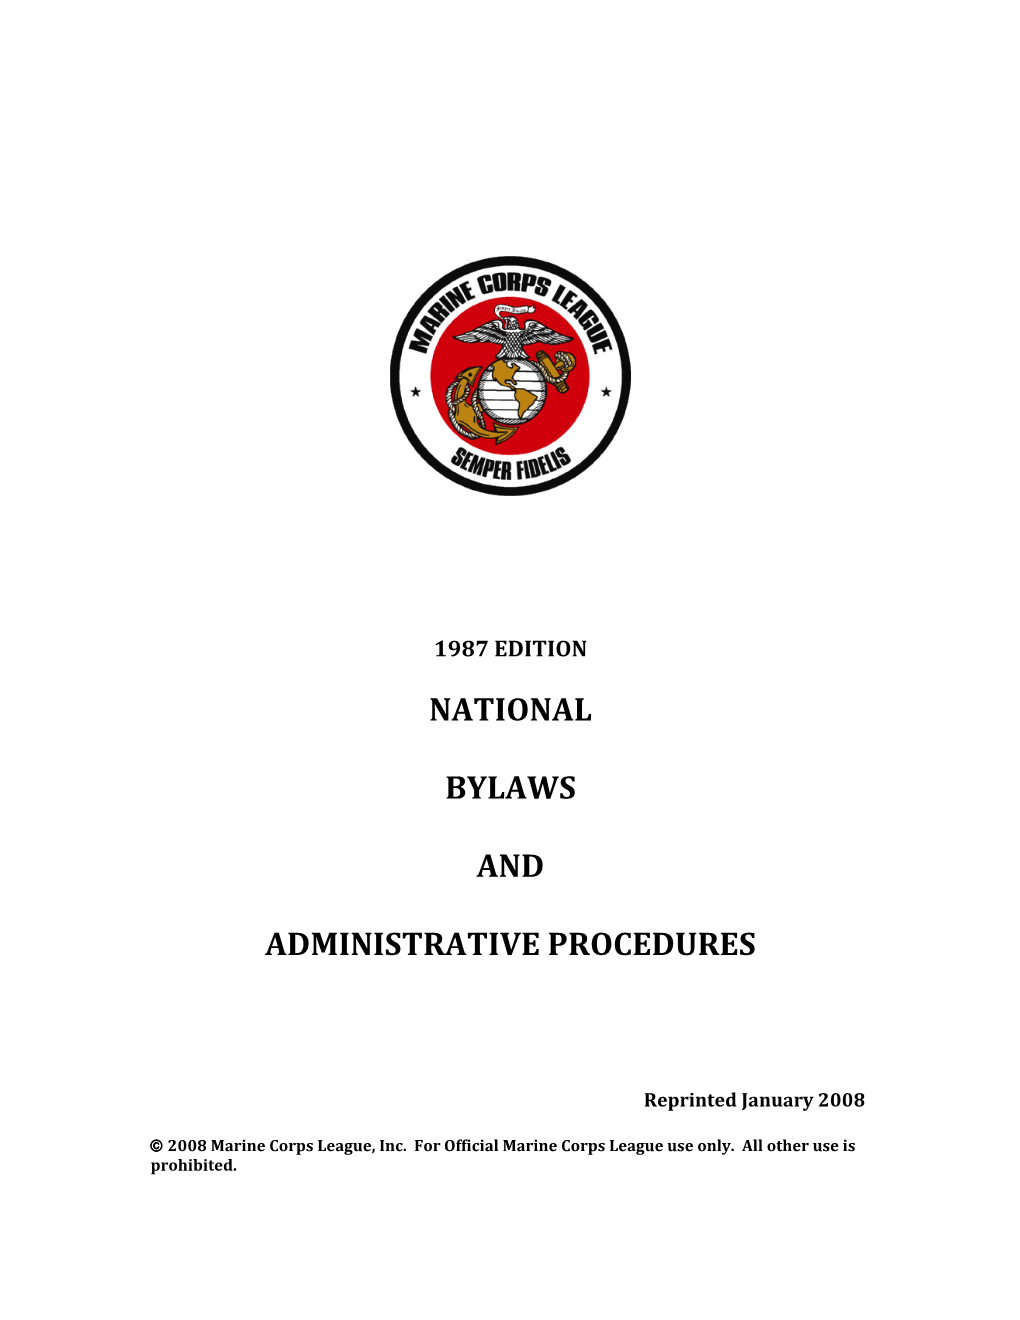 National Bylaws and Administrative Procedures Changes Approved at the 2007 National Convention